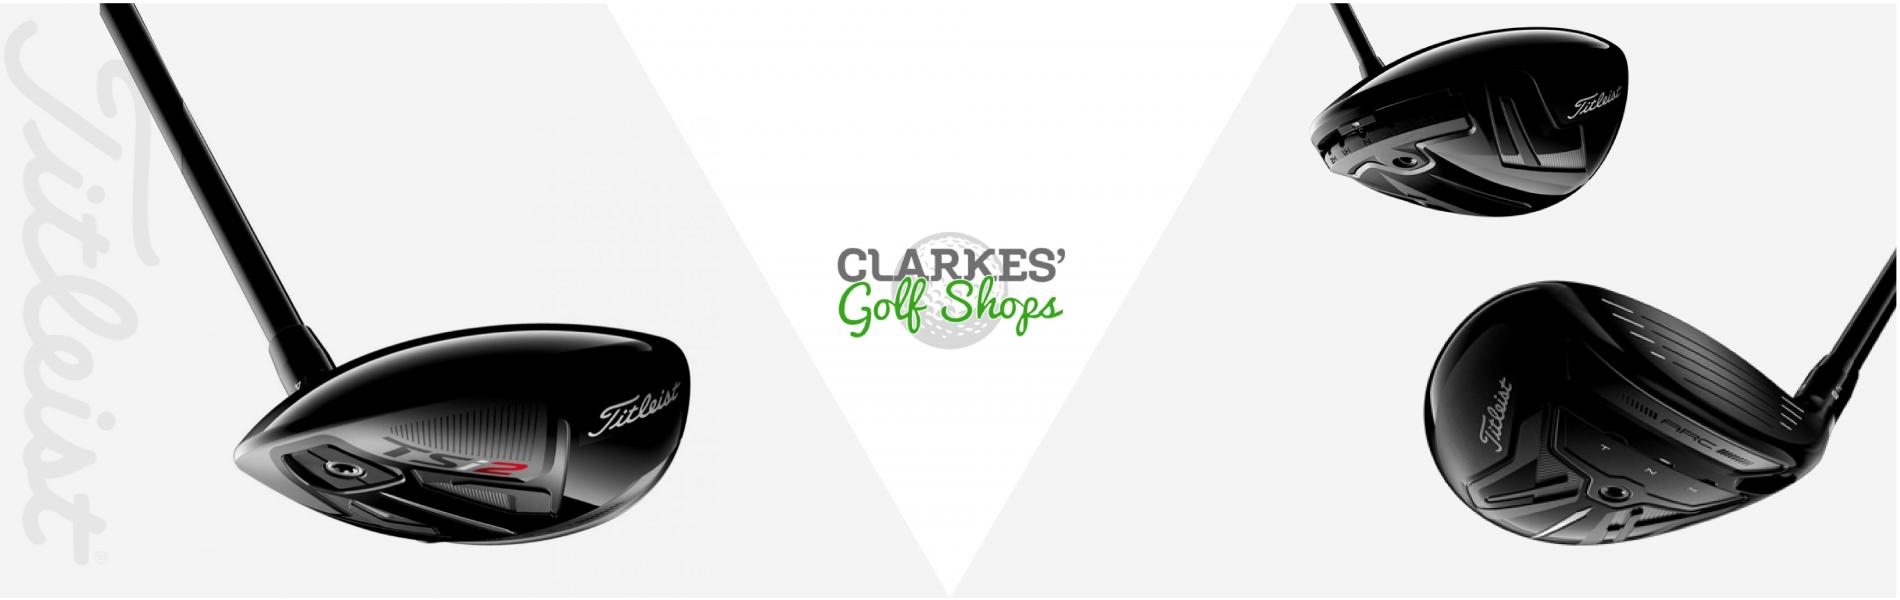 Step up your golfing game with the newest club arrivals from Titleist